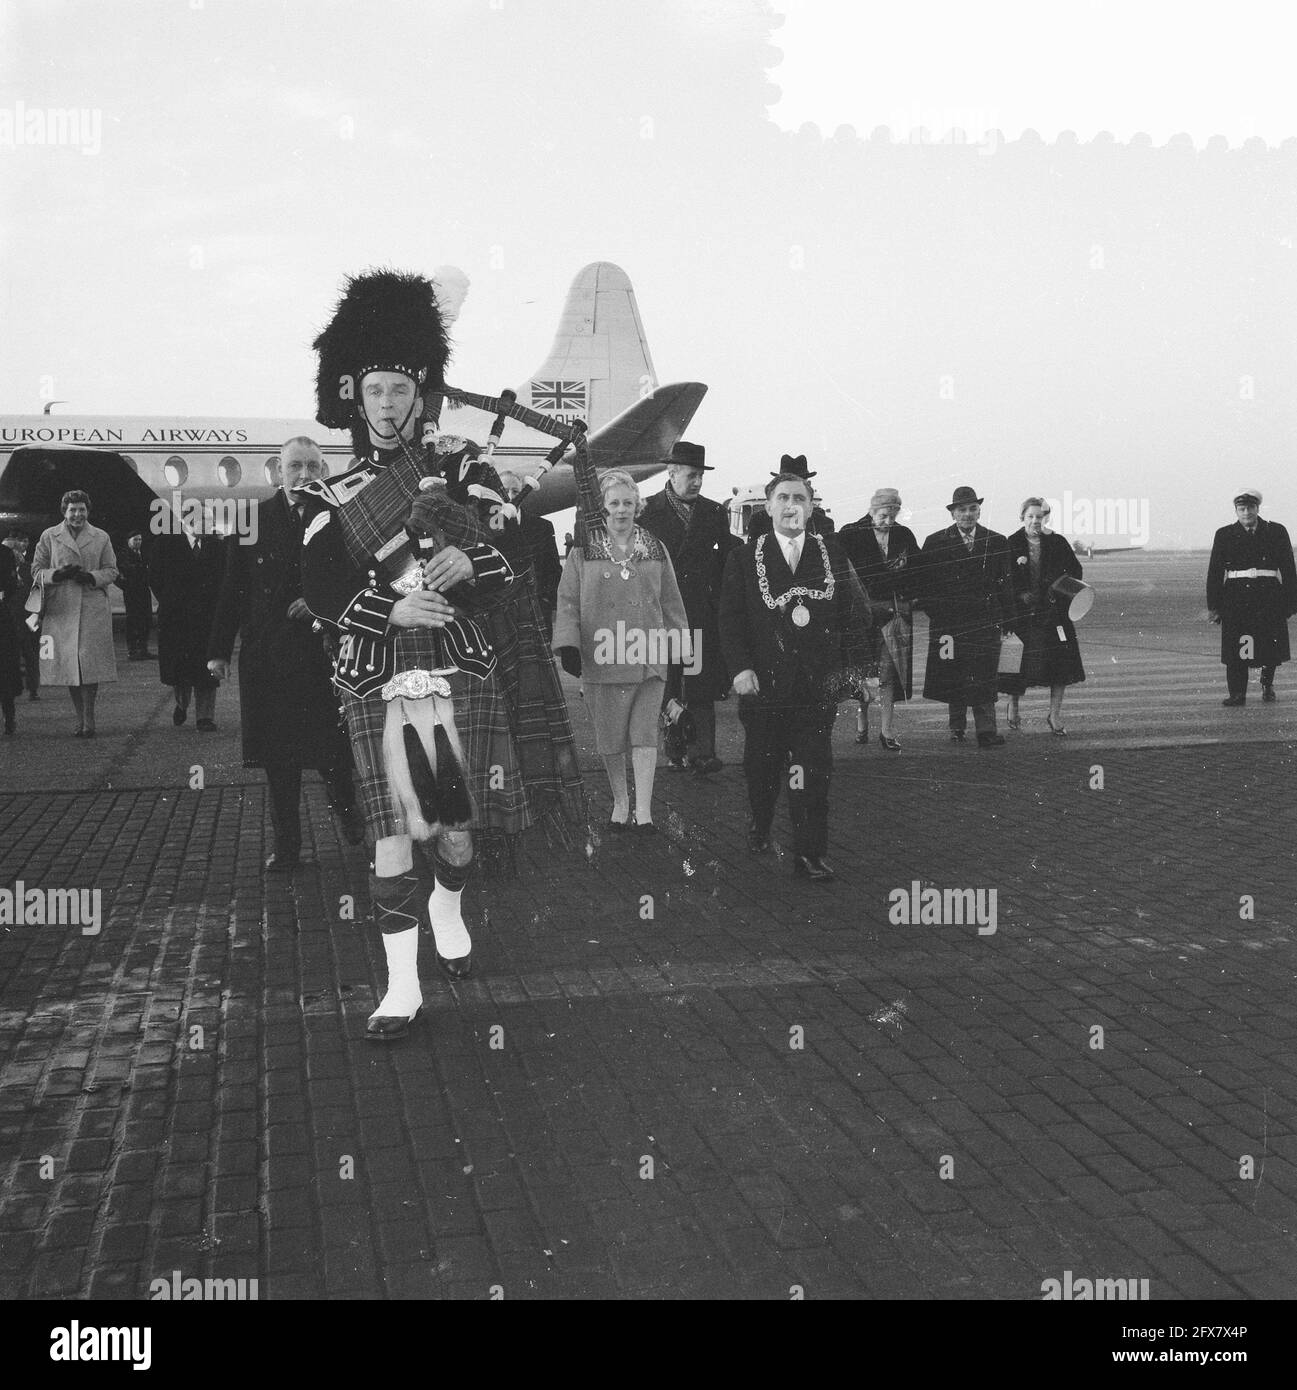 Arrival of Lord Provost of Glasgow at Schiphol Airport, the company on their way to the waiting room in front of a bagpiper, December 6, 1959, ARRIVAL, PEOPLE, bagpipers, The Netherlands, 20th century press agency photo, news to remember, documentary, historic photography 1945-1990, visual stories, human history of the Twentieth Century, capturing moments in time Stock Photo